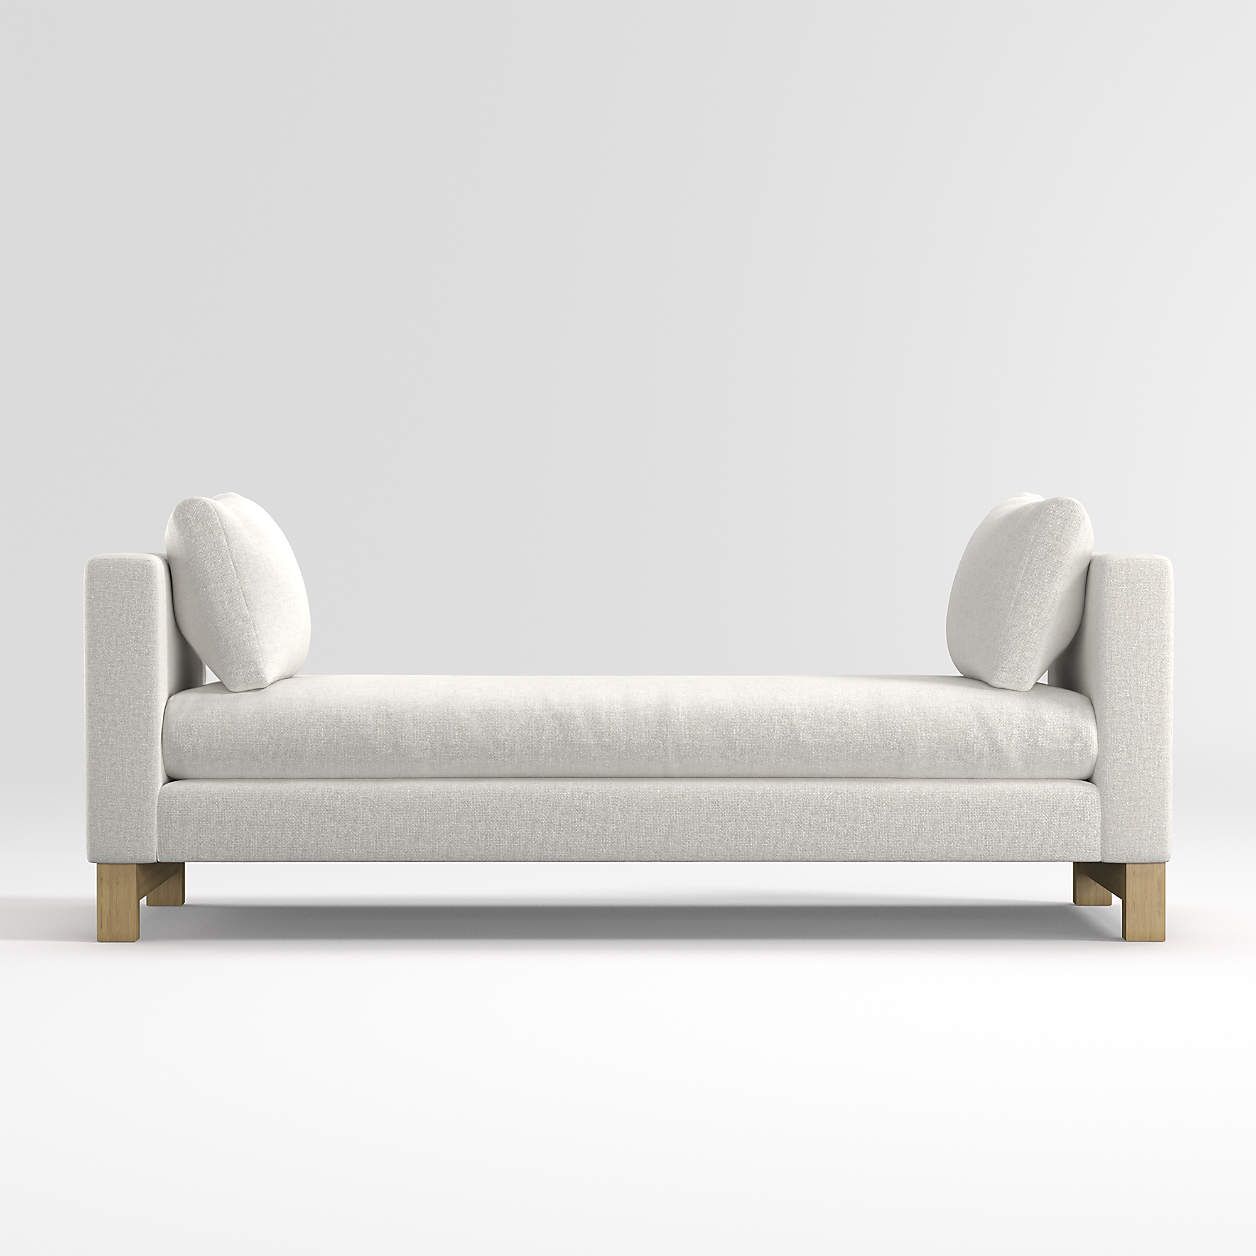 Pacific Daybed with Wood Legs + Reviews | Crate & Barrel | Crate & Barrel